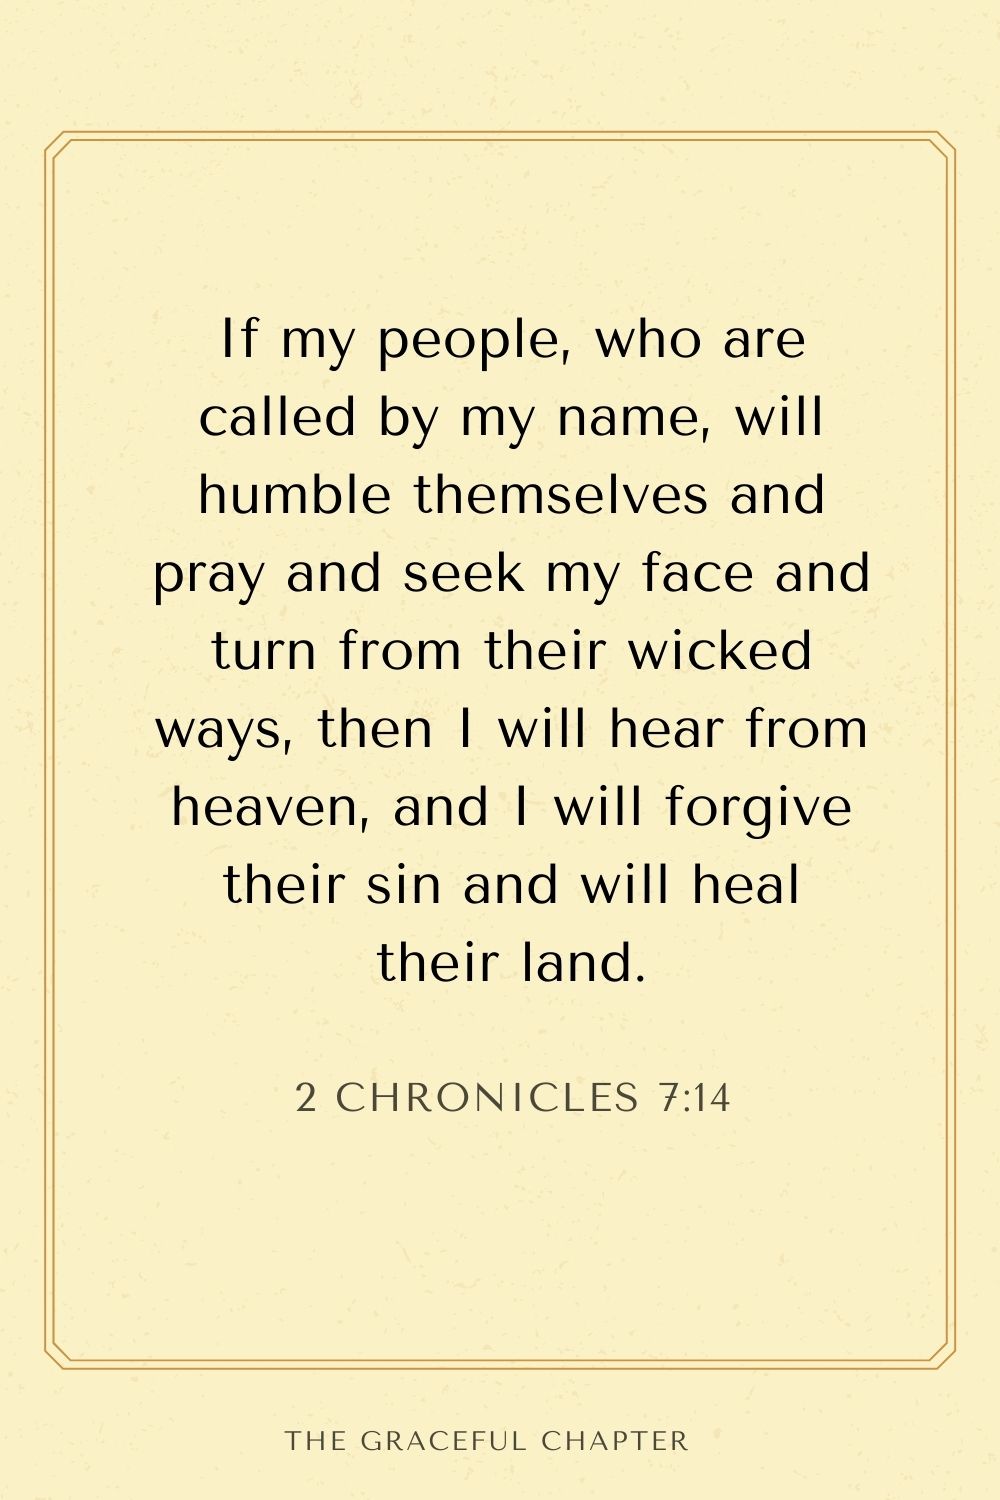 If my people, who are called by my name, will humble themselves and pray and seek my face and turn from their wicked ways, then I will hear from heaven, and I will forgive their sin and will heal their land. 2 Chronicles 7:14